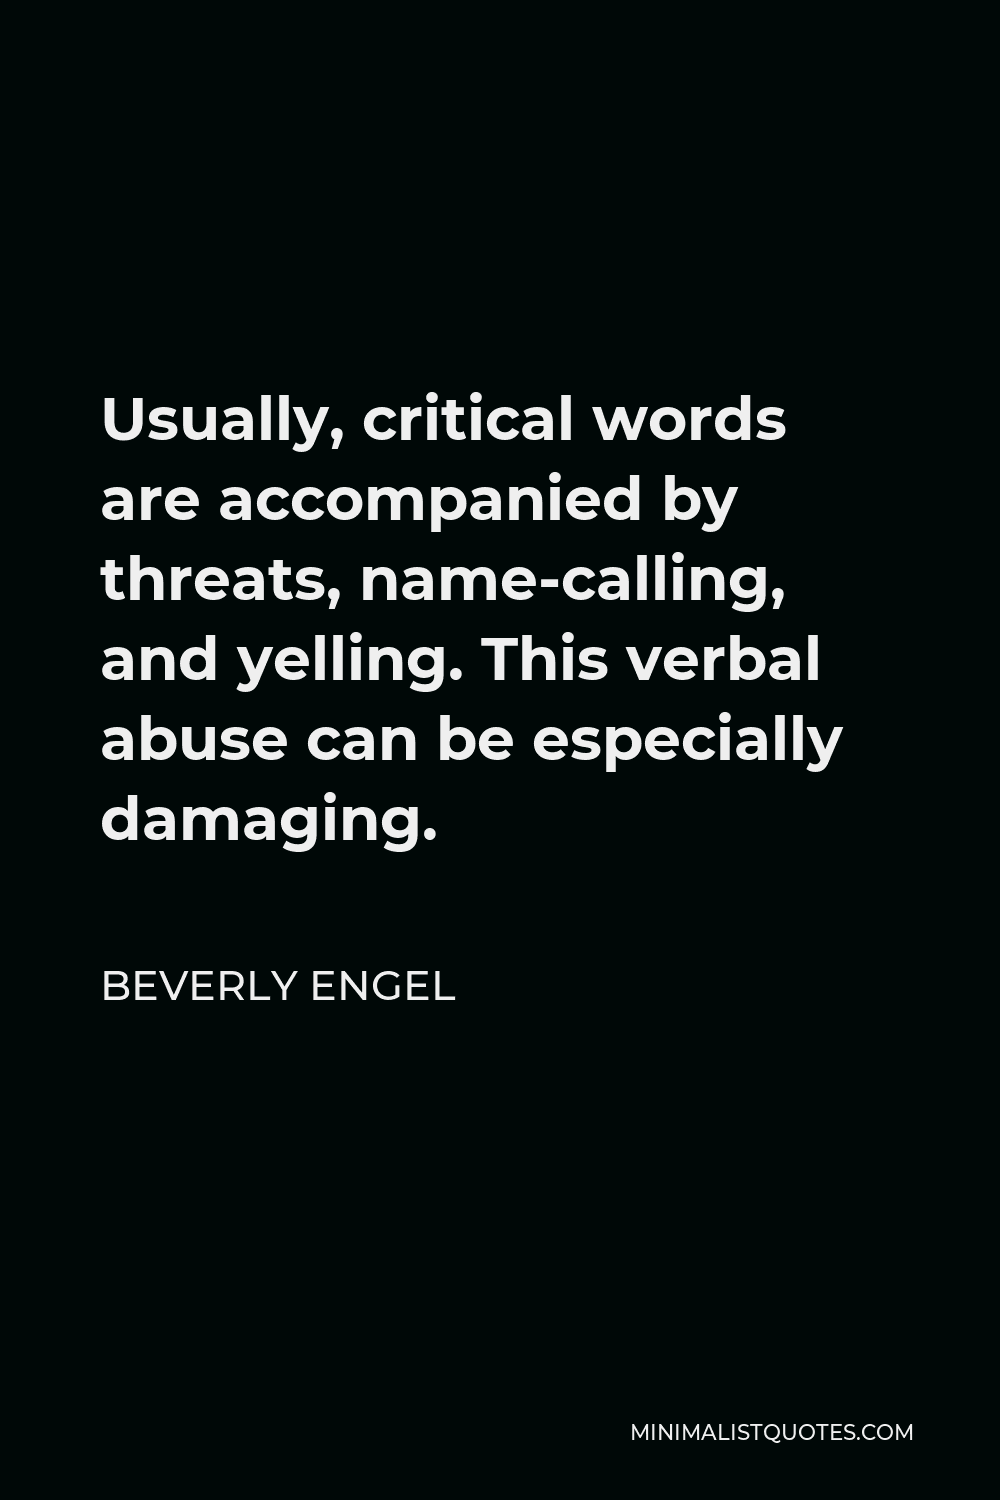 Beverly Engel Quote - Usually, critical words are accompanied by threats, name-calling, and yelling. This verbal abuse can be especially damaging.